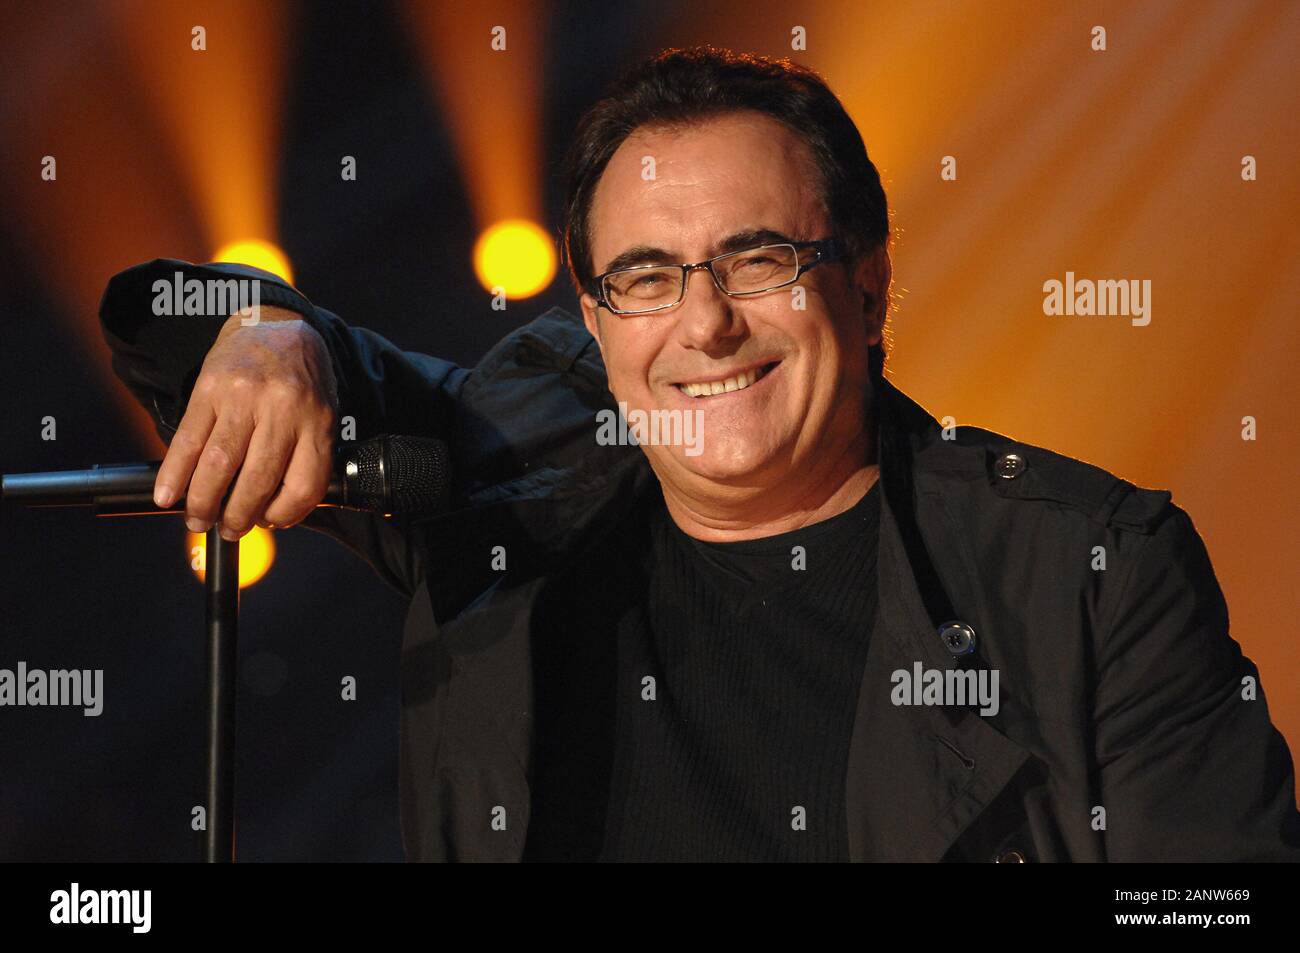 Milan Italy 14/03/2007 , Albano Carrisi live concert in Rai broadcast 'CD LIVE' Stock Photo